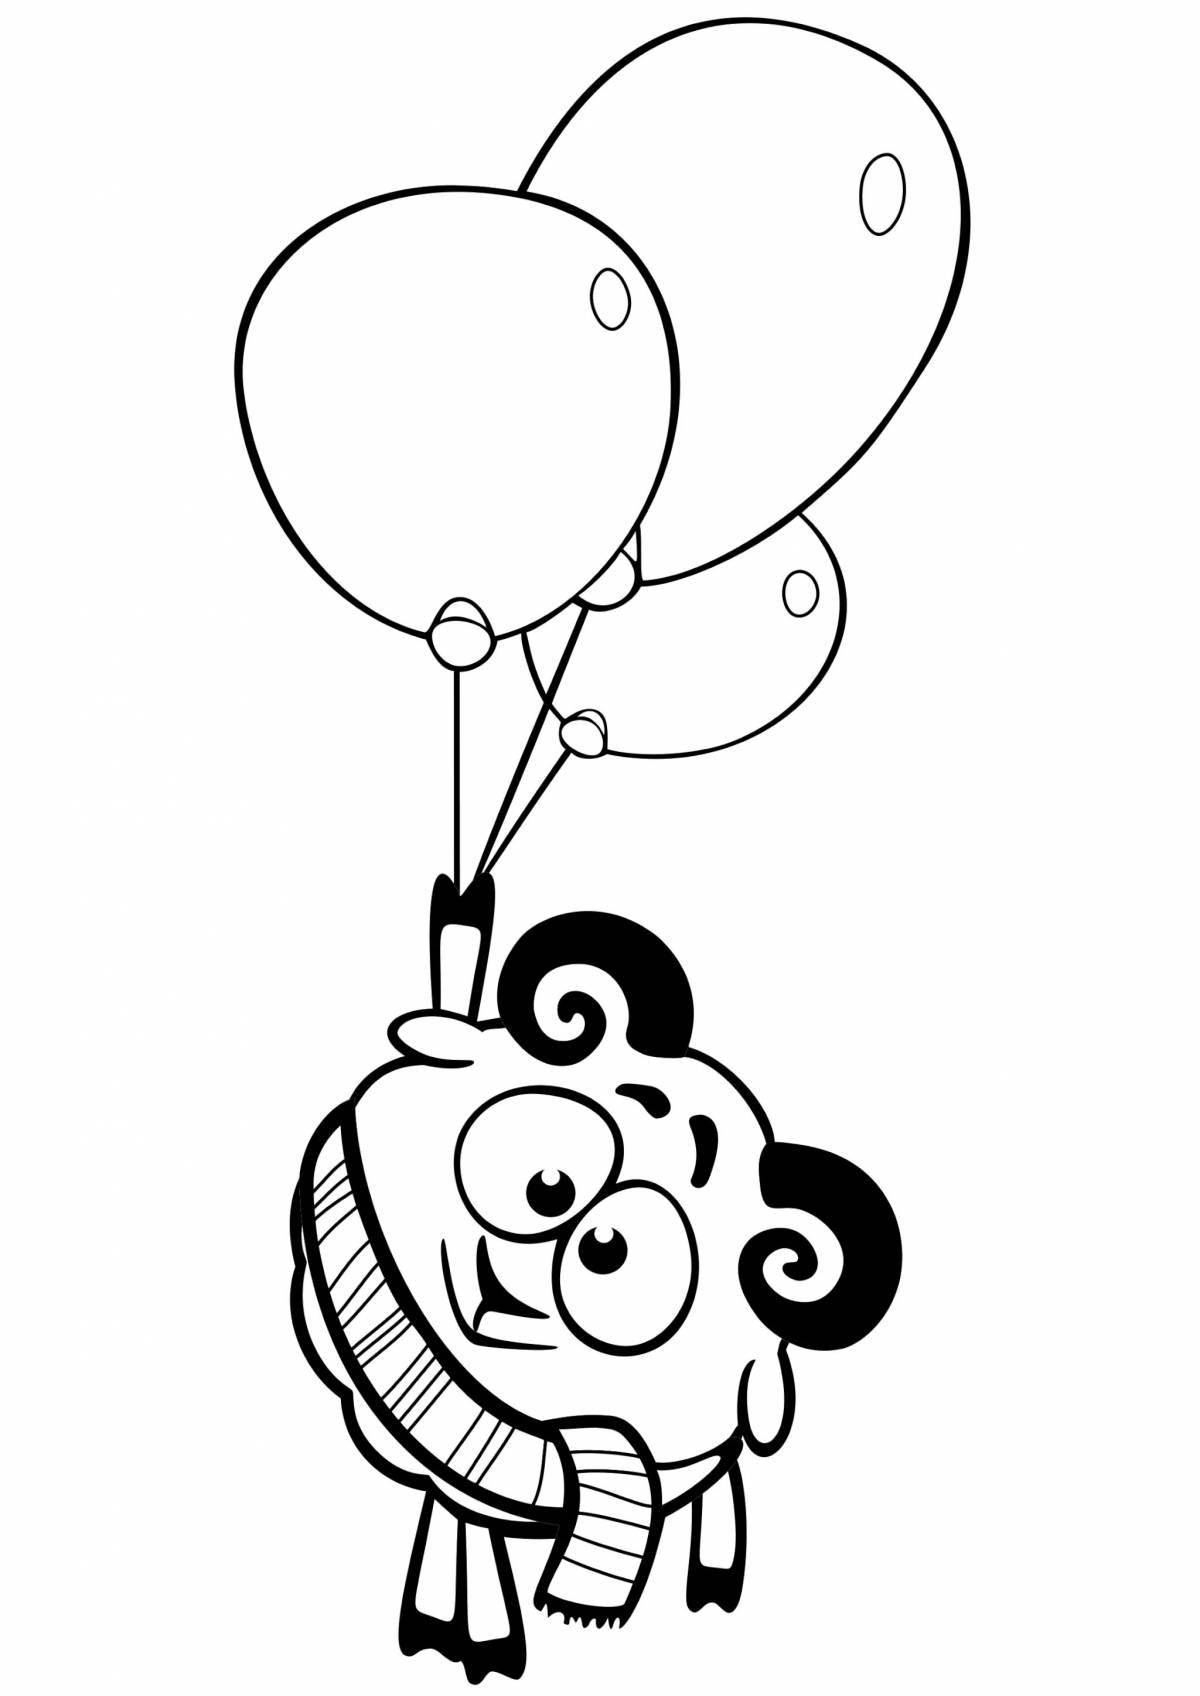 Coloring book colorful happy birthday balloons